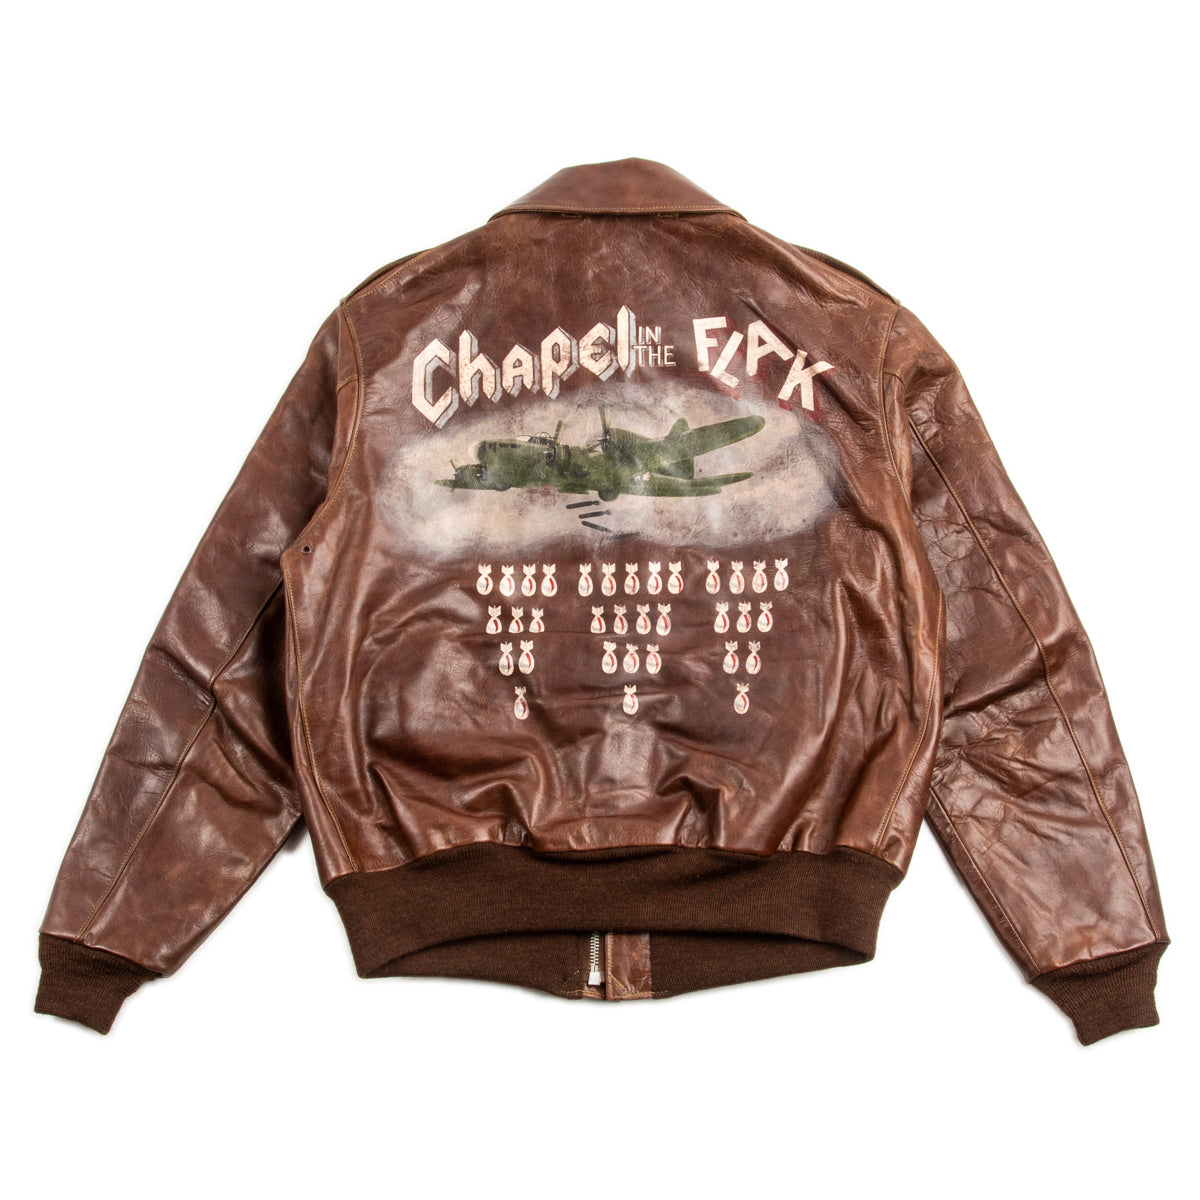 Type A-2 Leather Jacket - 100th Bomb Group Chapel in the Flak